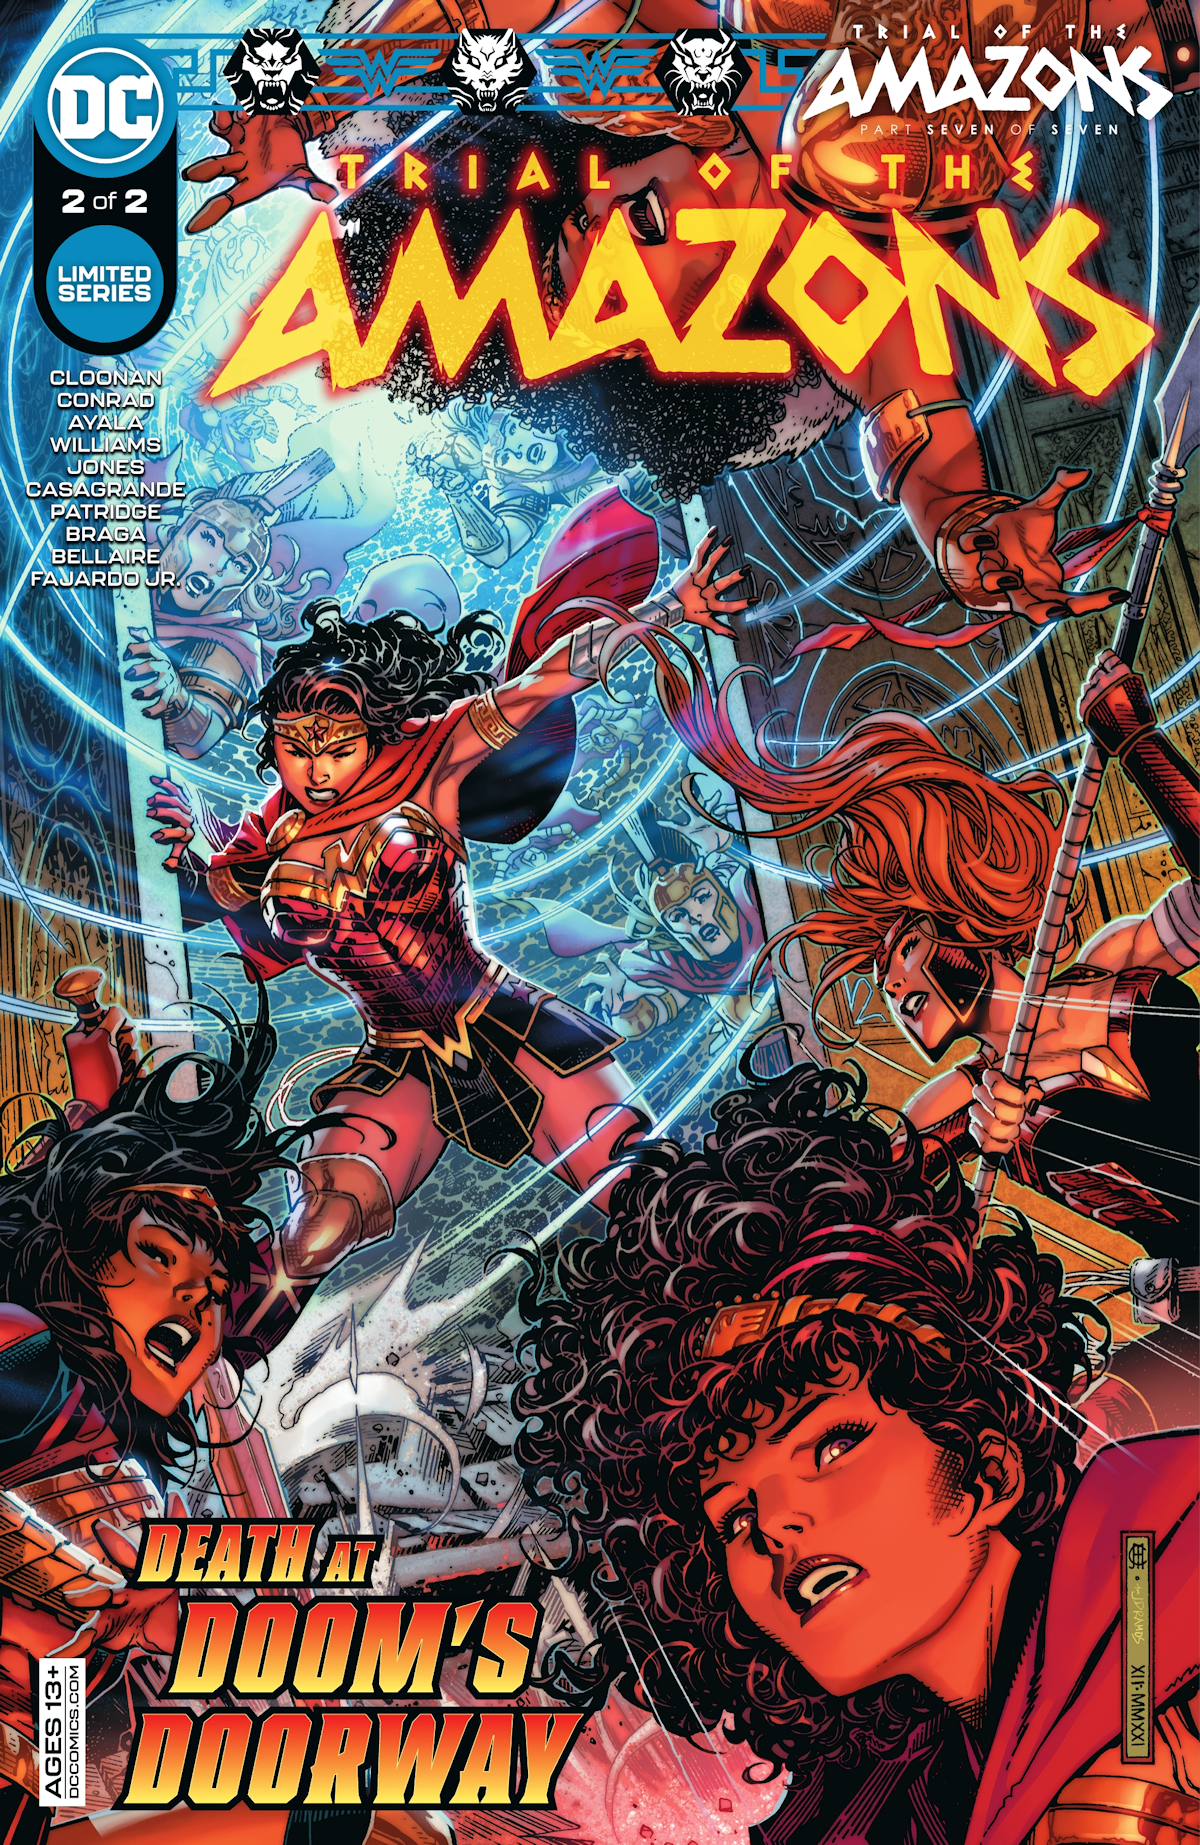 Trial of the Amazons 2 (Cover A)